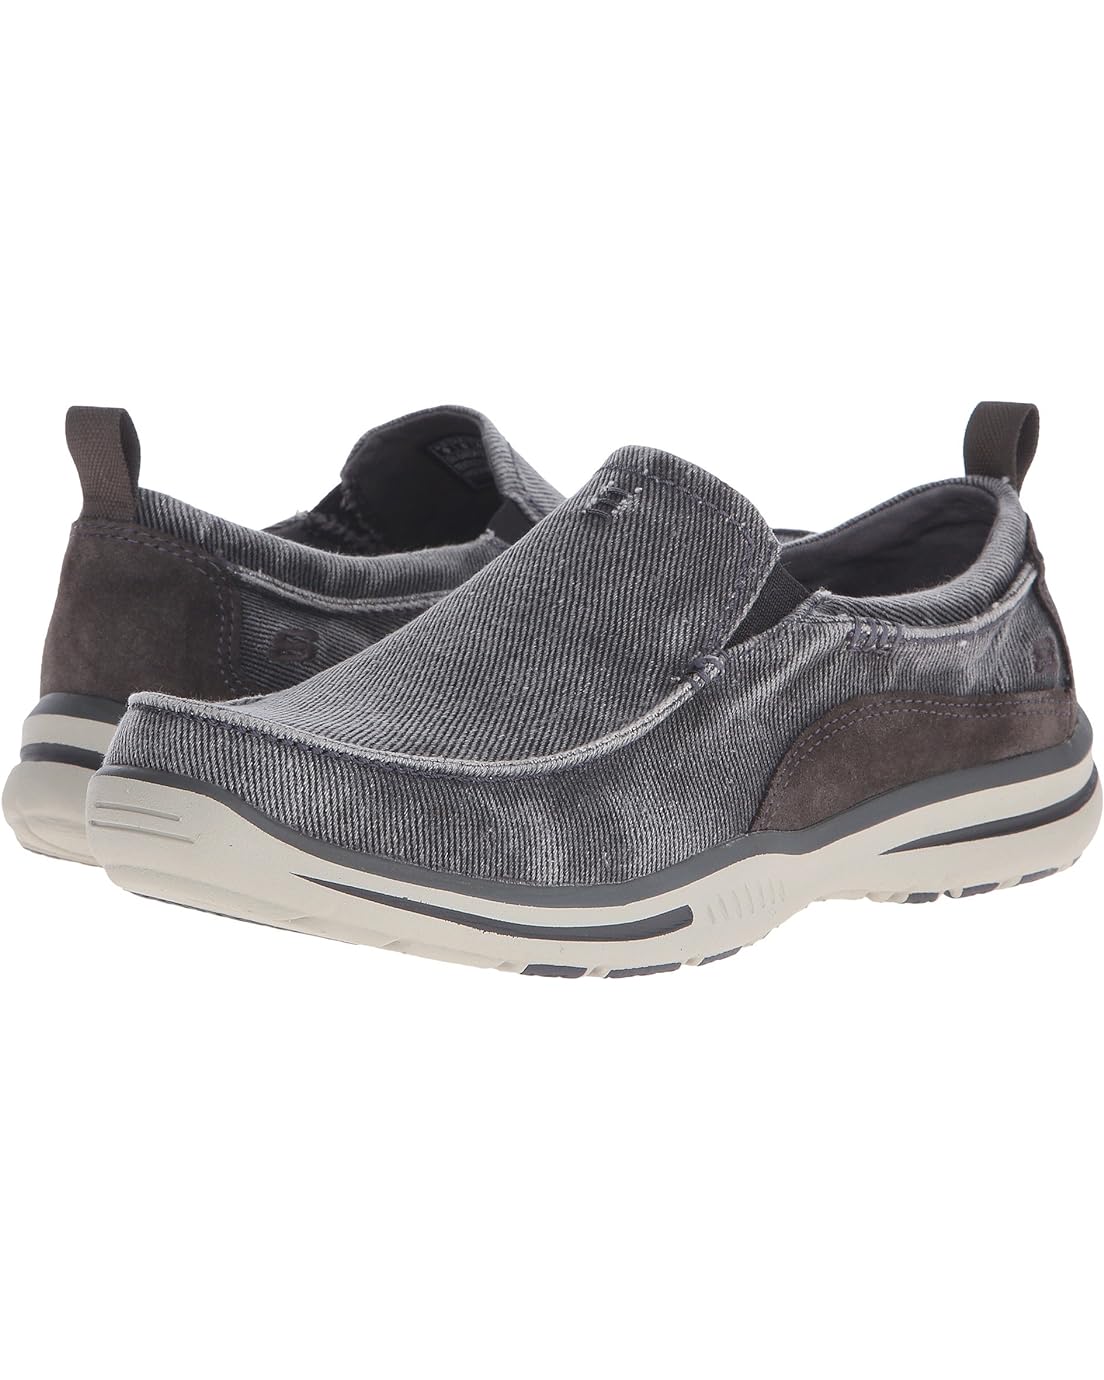 SKECHERS Relaxed Fit Elected - Drigo